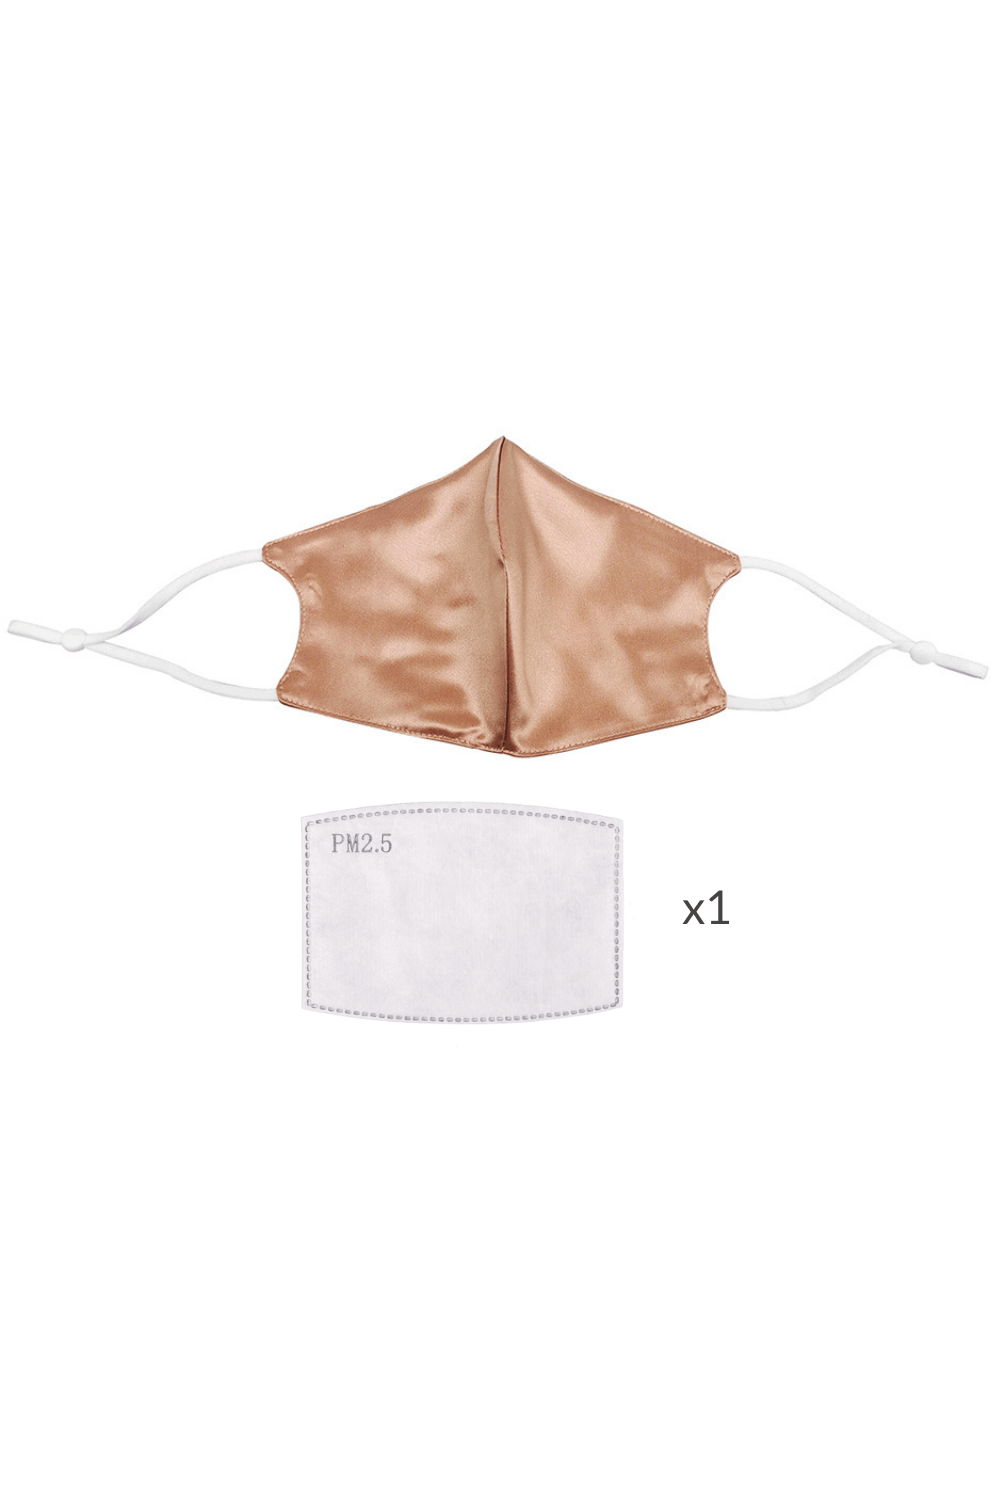 STELLAR Silk Face Mask - Rose Gold (with Nose Wire and Filter Pocket) - BASK ™